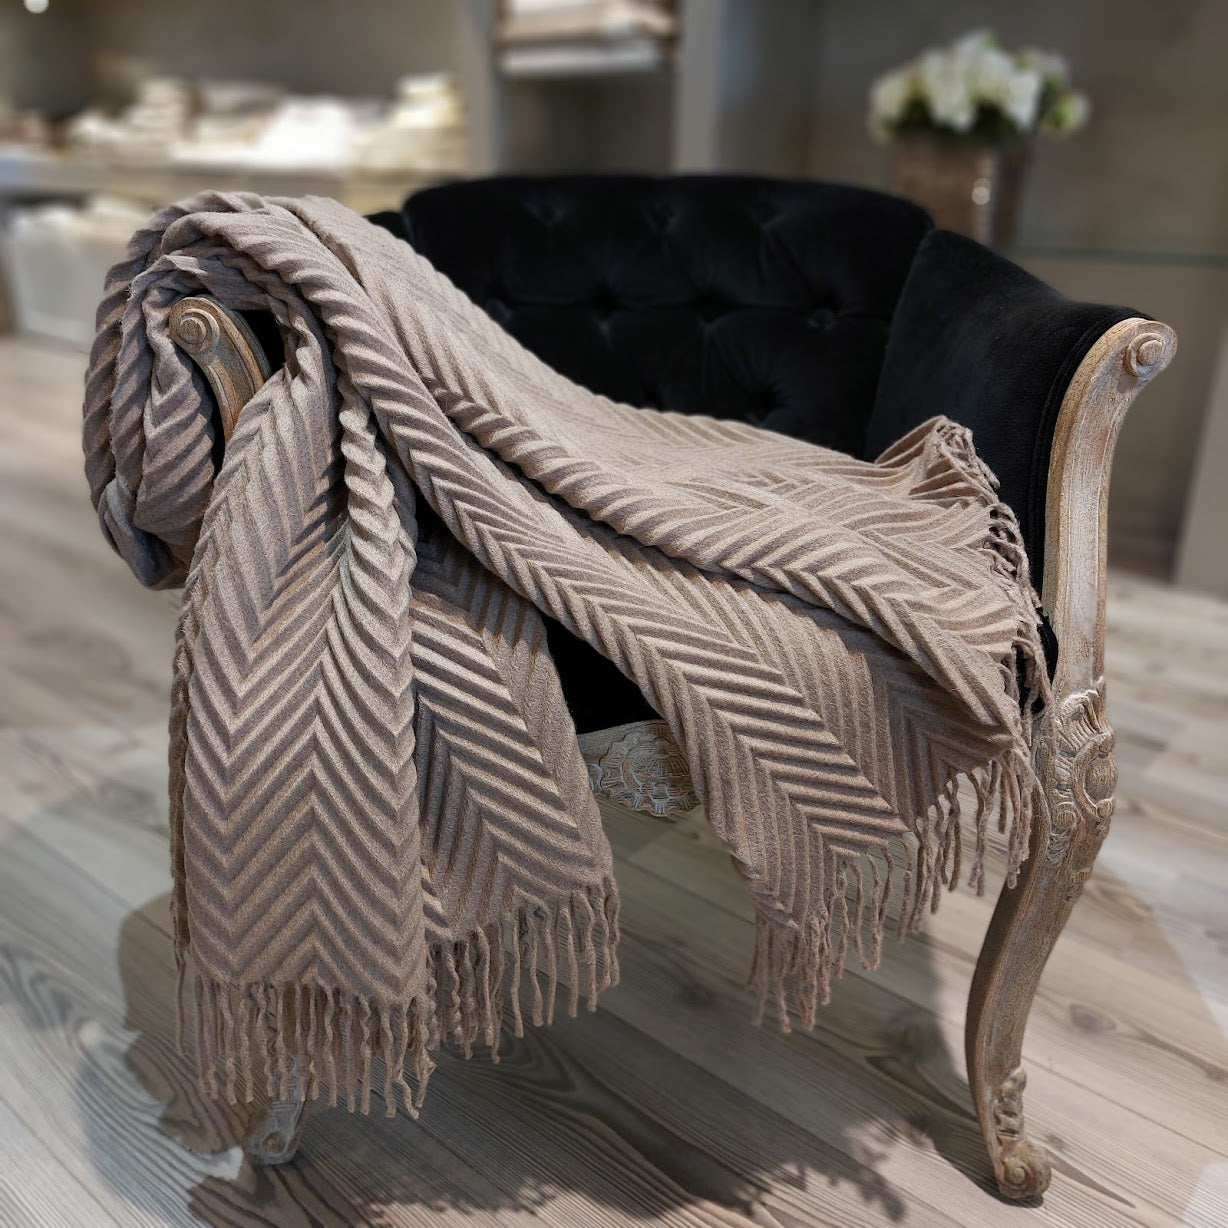 CASHMERE THROWS & BLANKETS